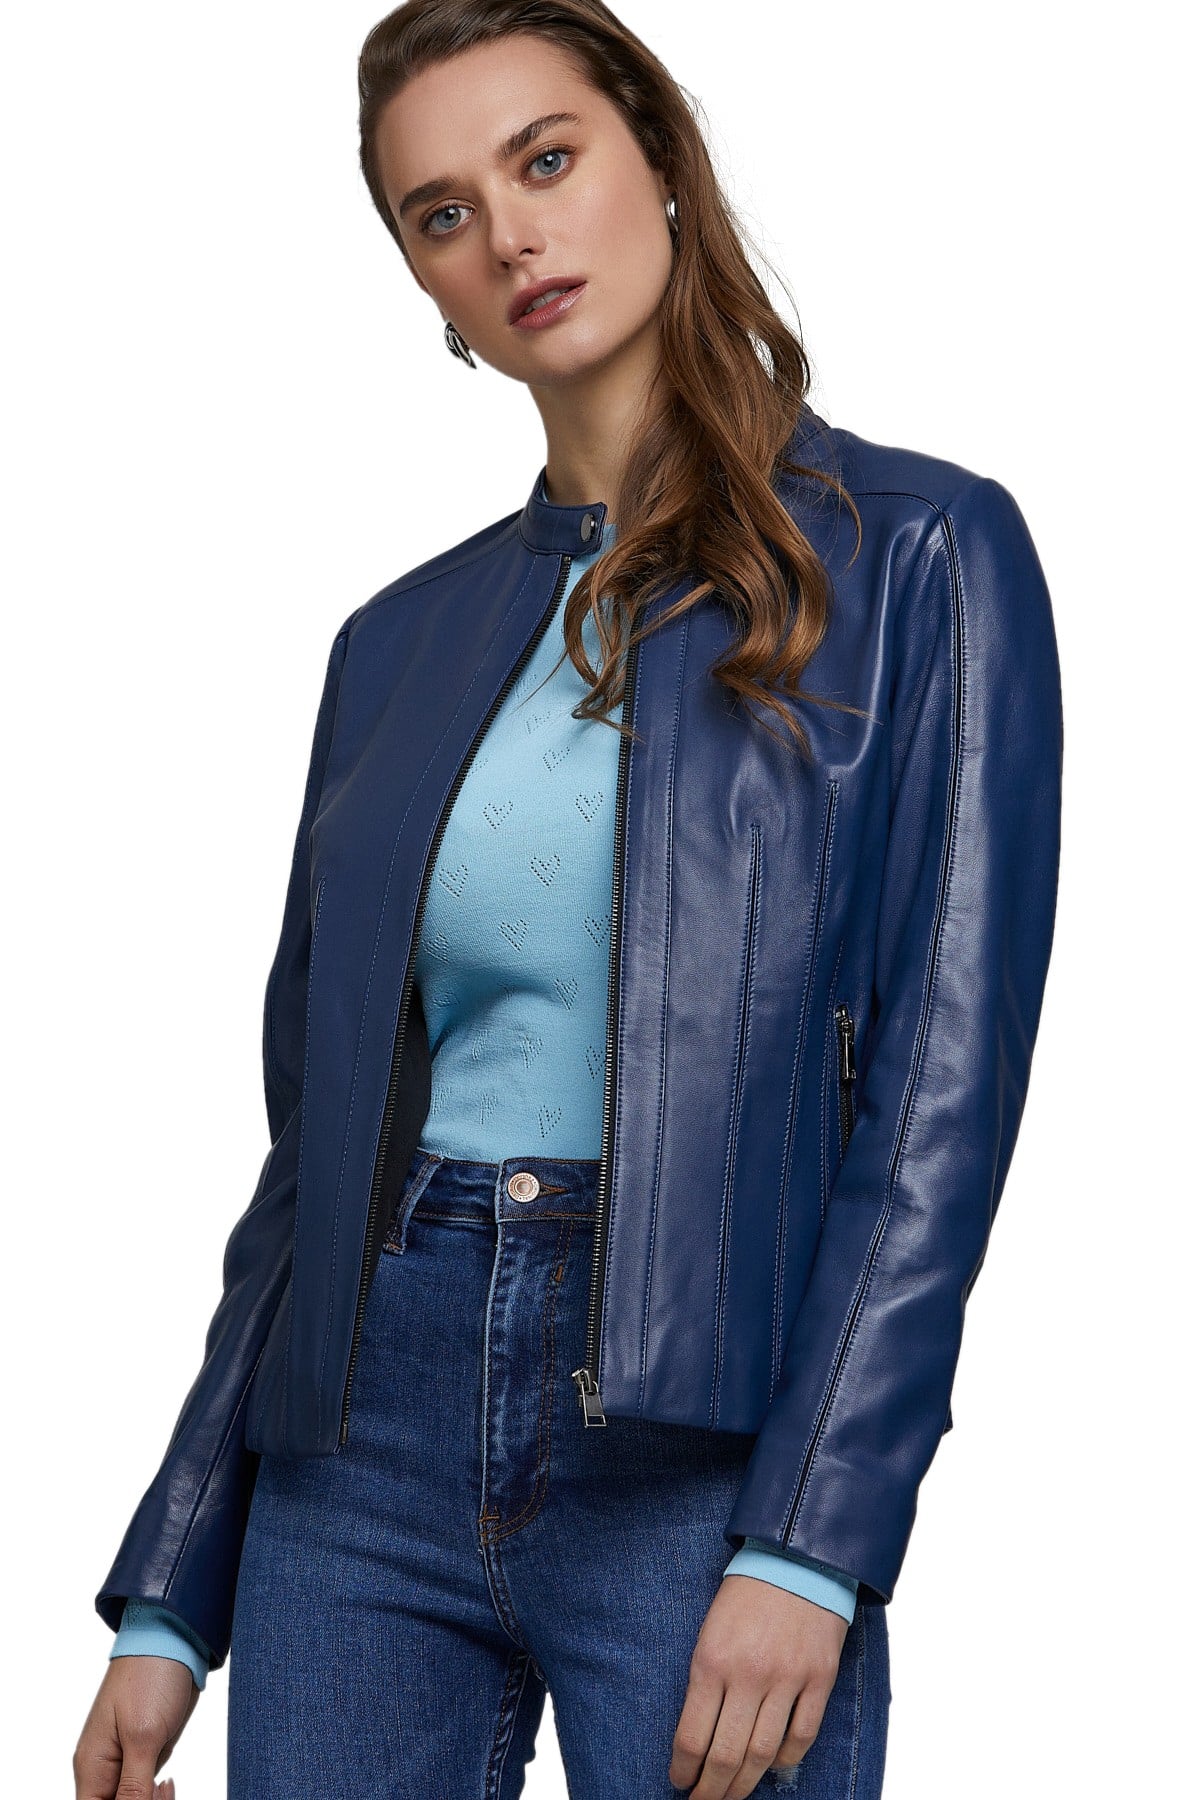 Dark Blue Motorcycle Leather Jacket for Womens in Colorado